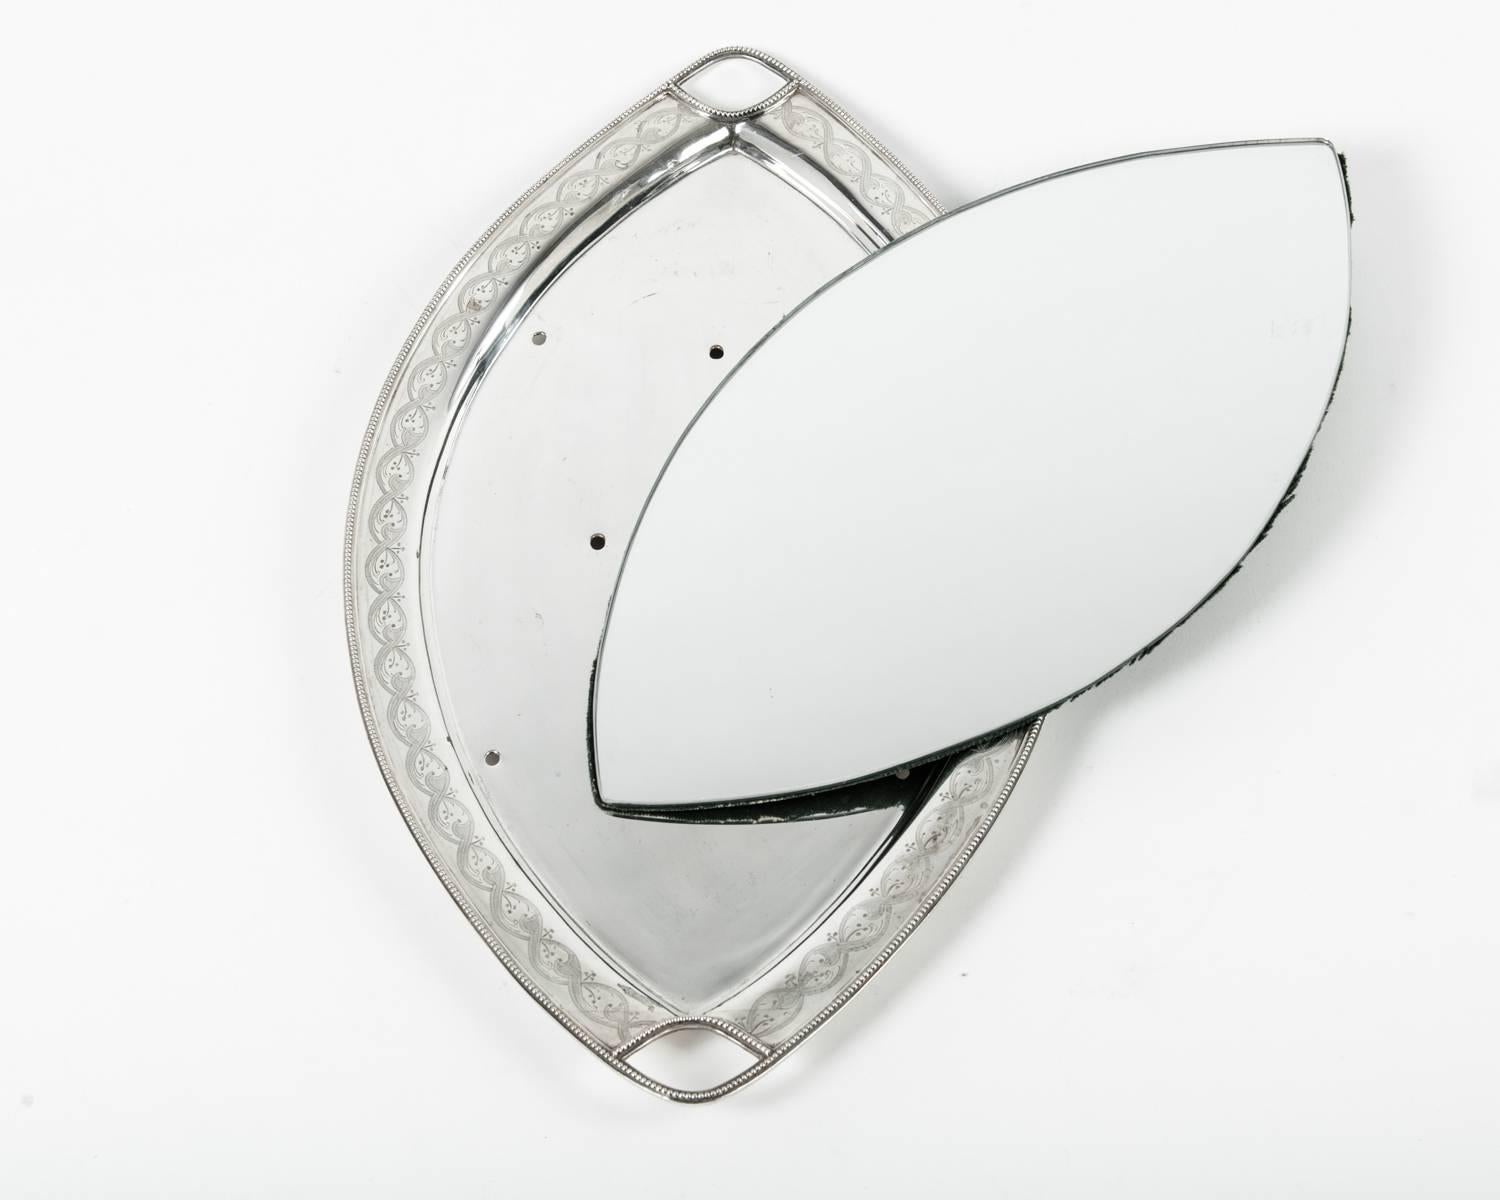 19th Century English Silver Plate Footed Oval Tray or Mirror Insert